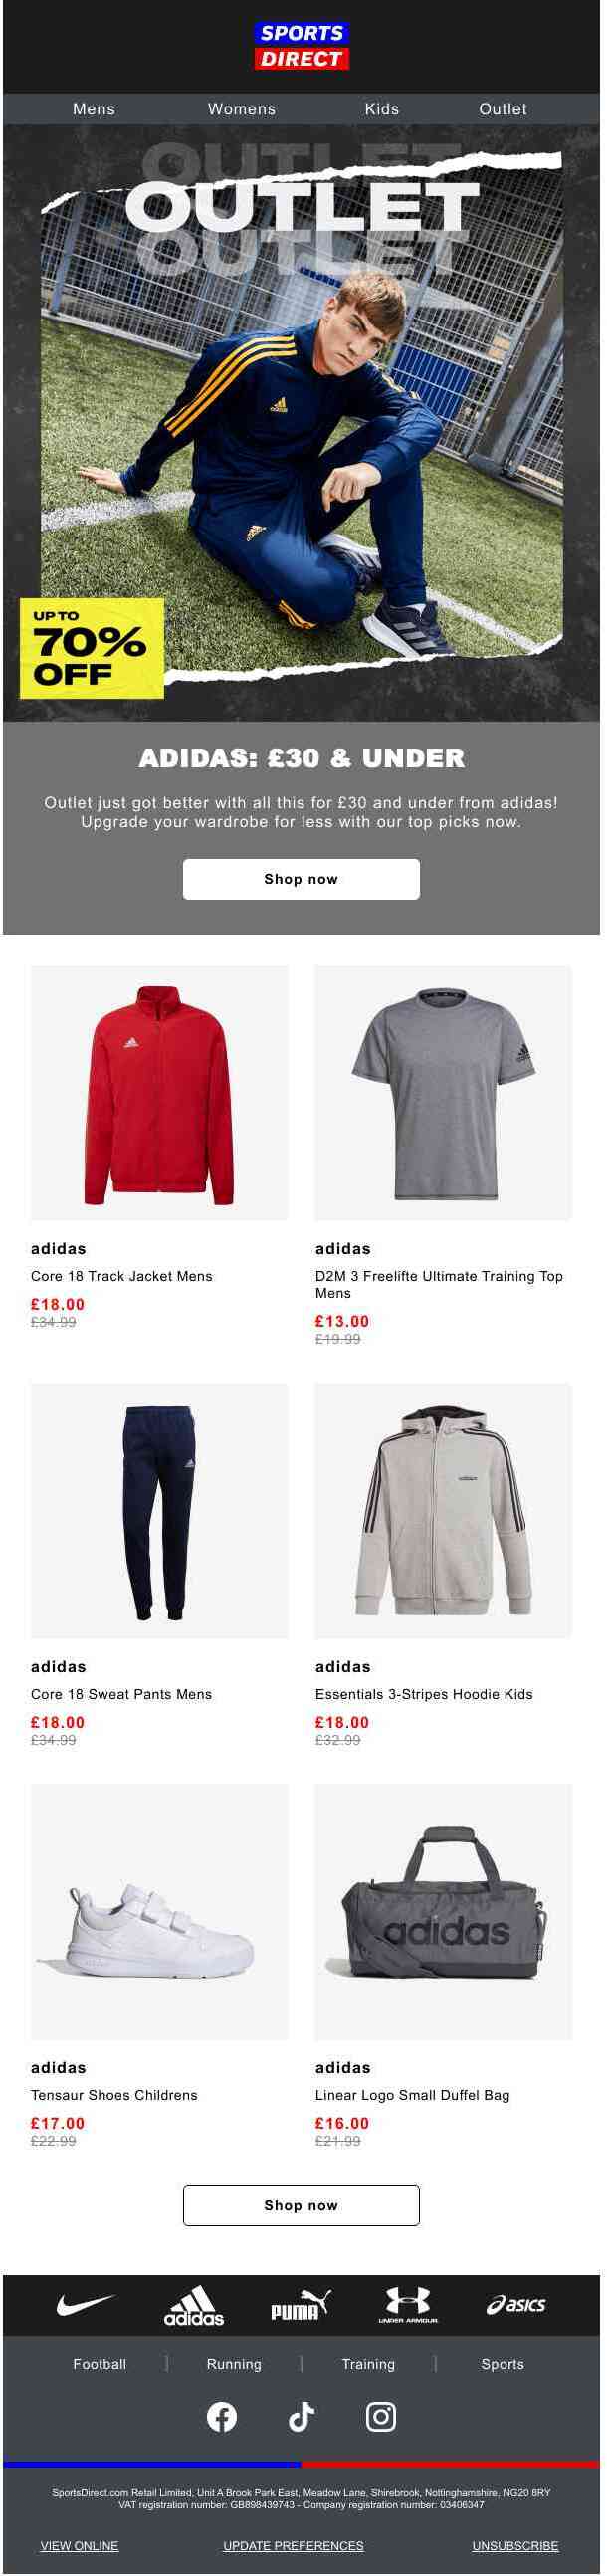 UNDER £30 adidas Outlet offers 🤯